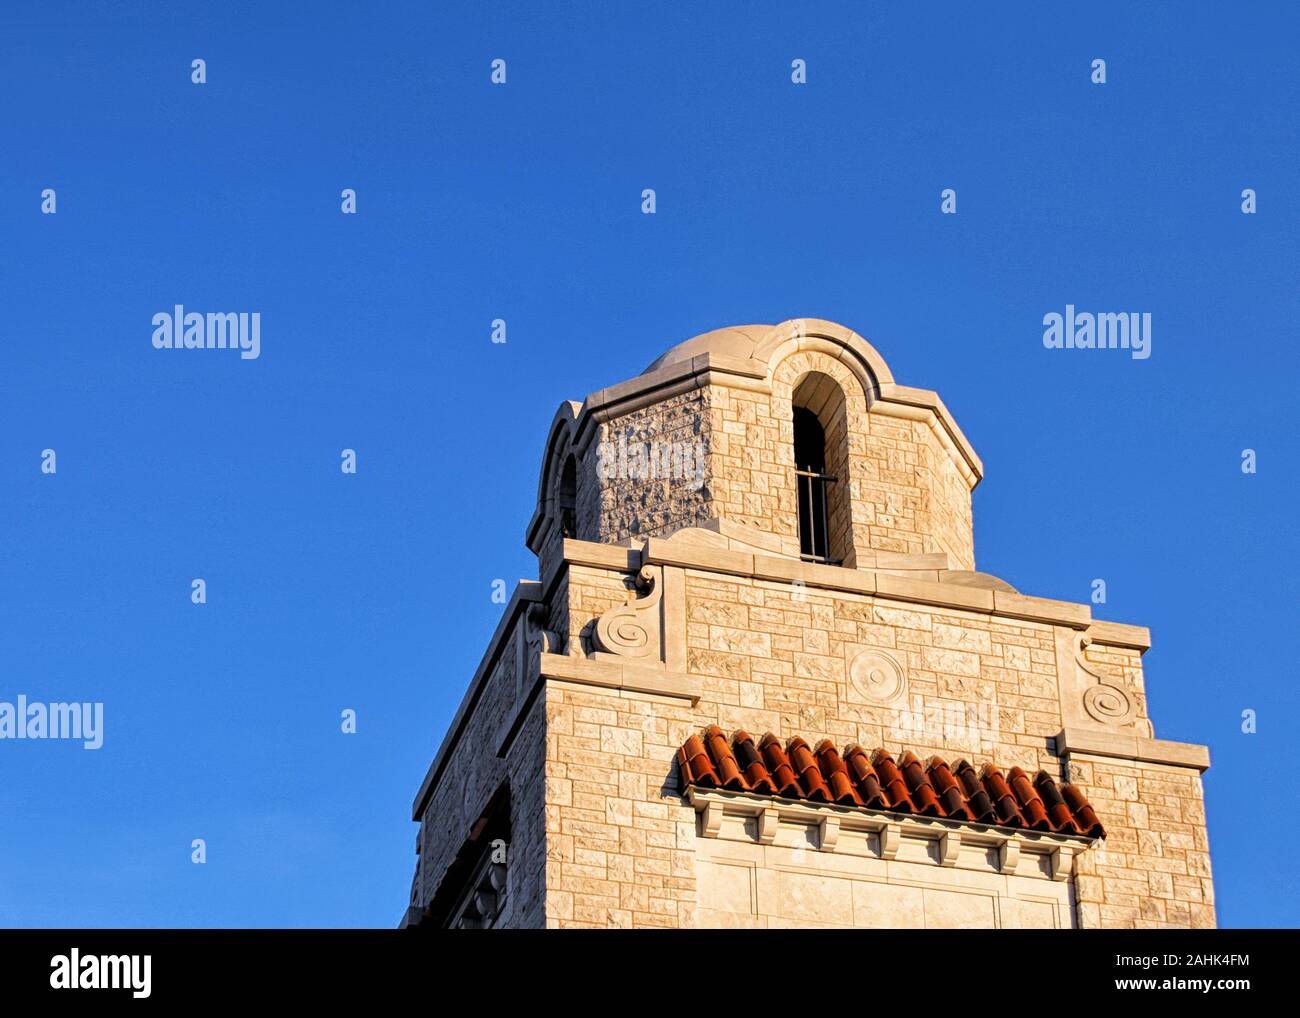 The top of the tower of the Spanish Colonial Revival style Union Station near downtown Oklahoma City stands out against a brilliant blue sky. Stock Photo